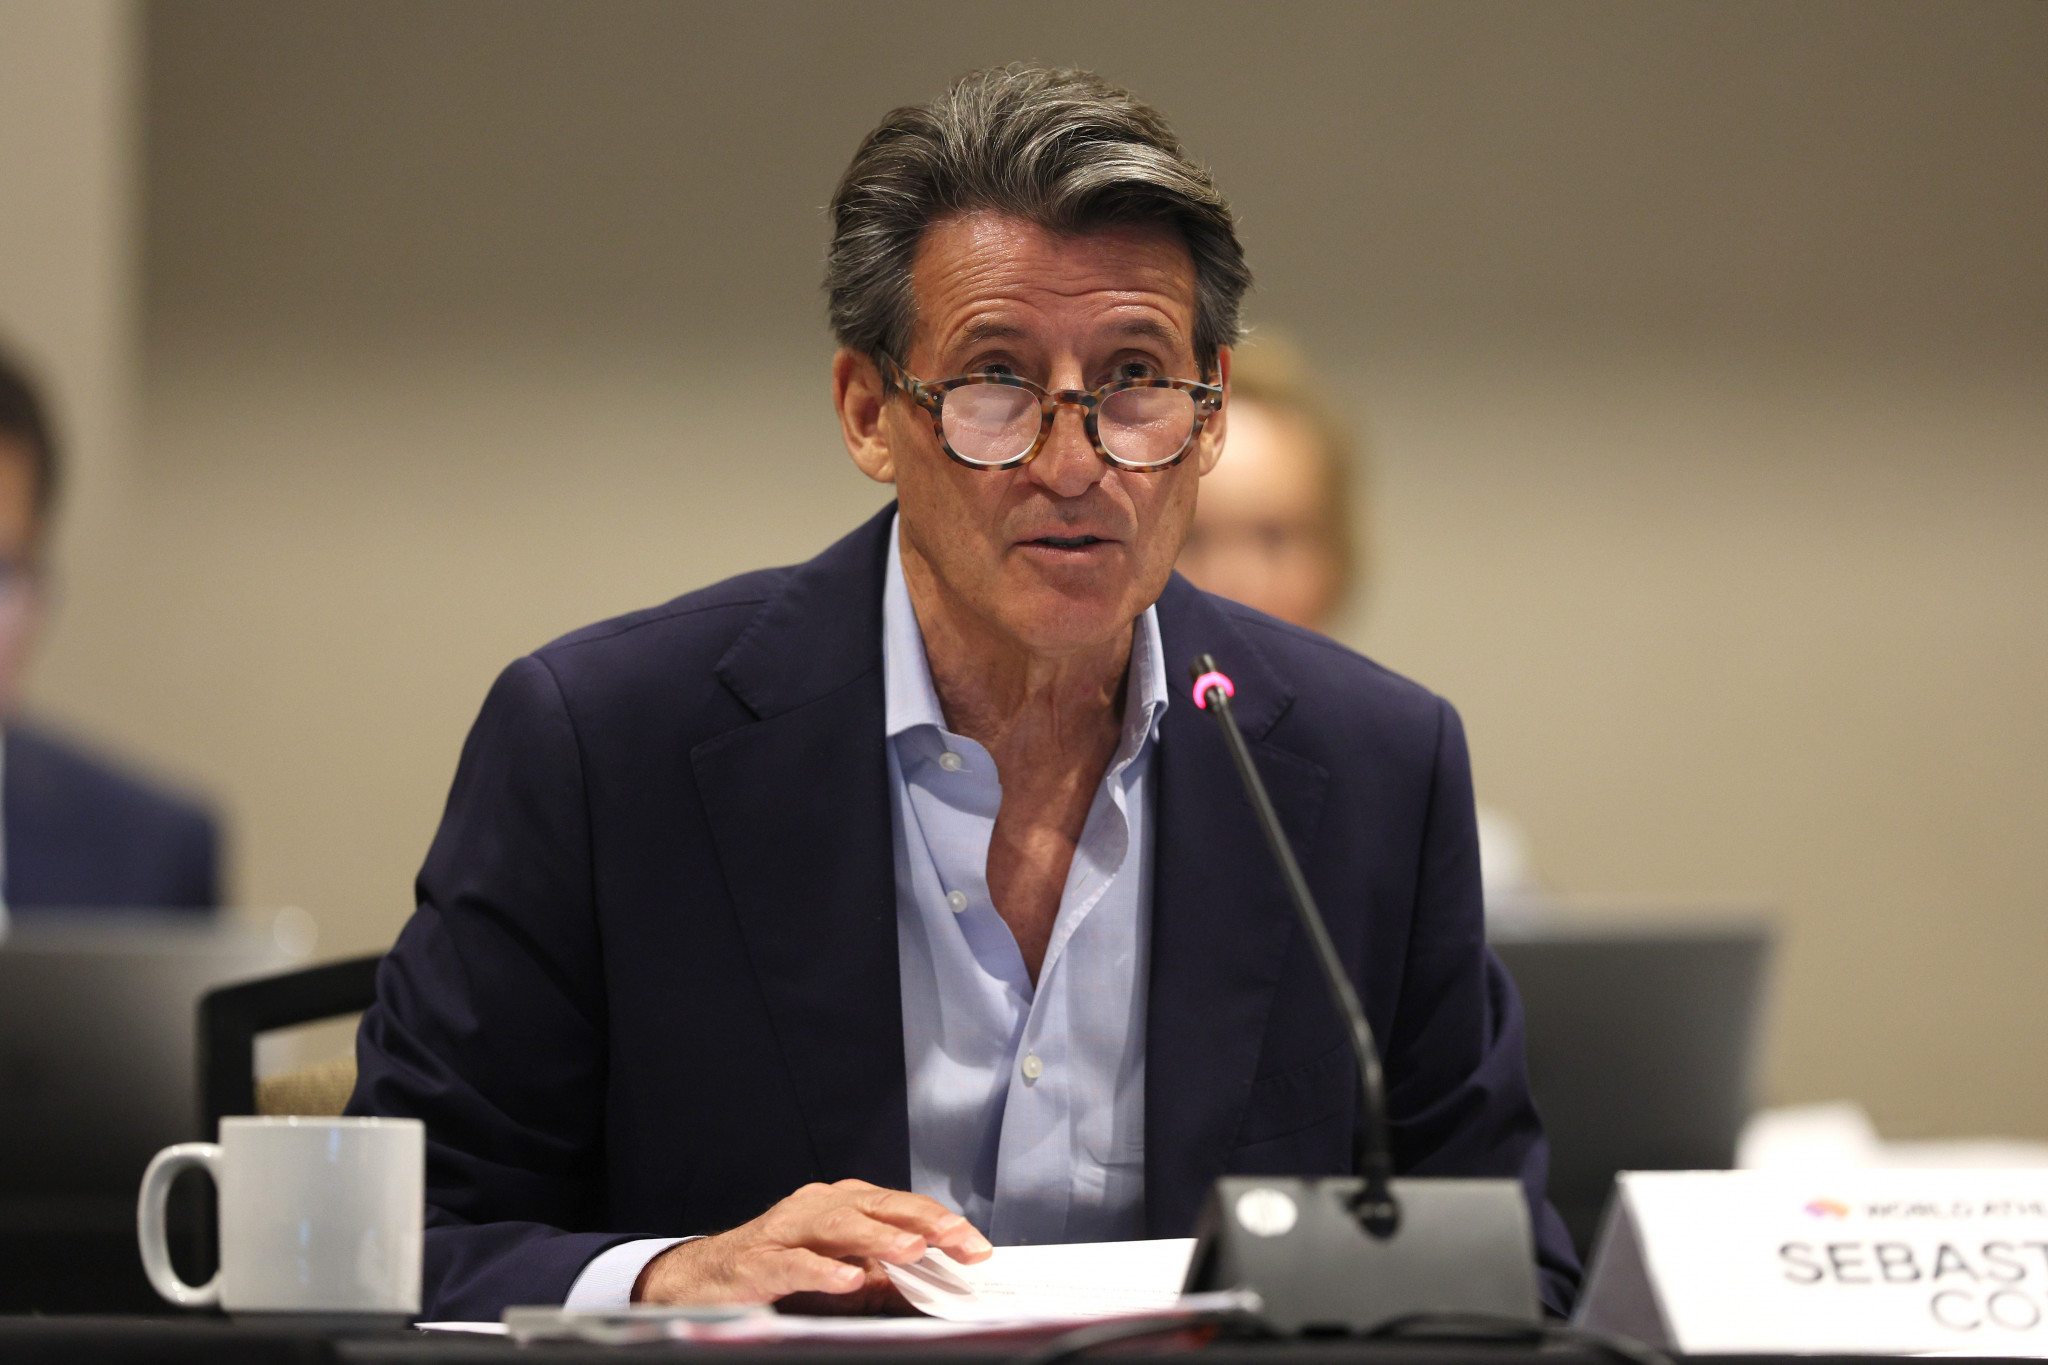 World Athletics President Sebastian Coe said he hoped Japan's awarding of the World Athletics Championships in 2025 would be a shining light for the country ©Getty Images